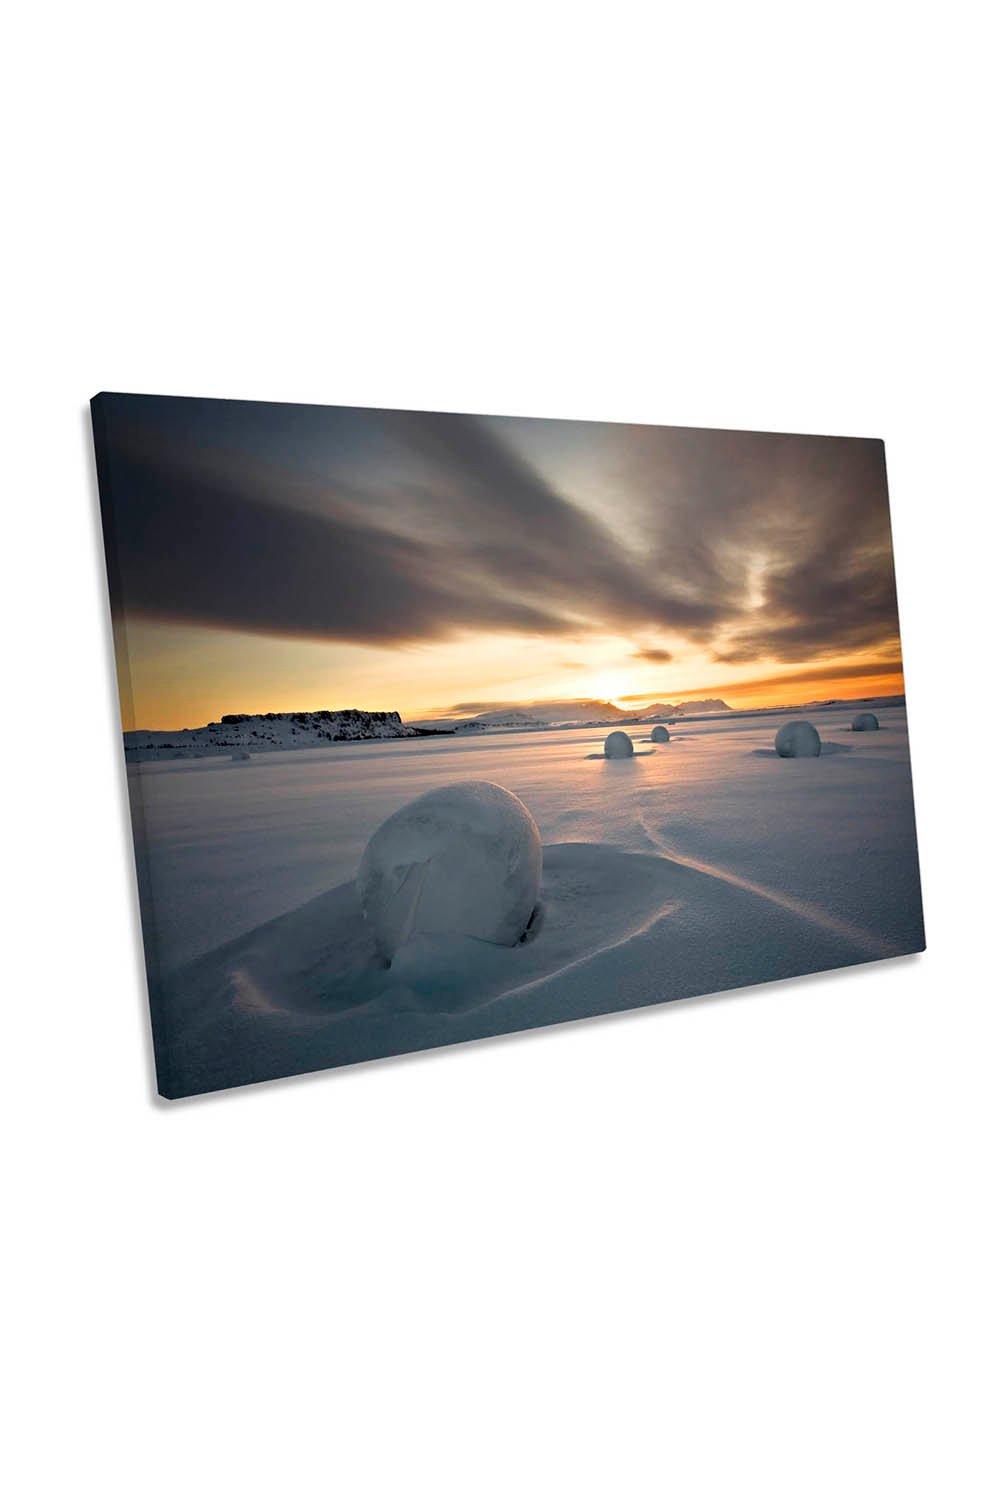 Snow Bales Farm Winter Sunset Canvas Wall Art Picture Print